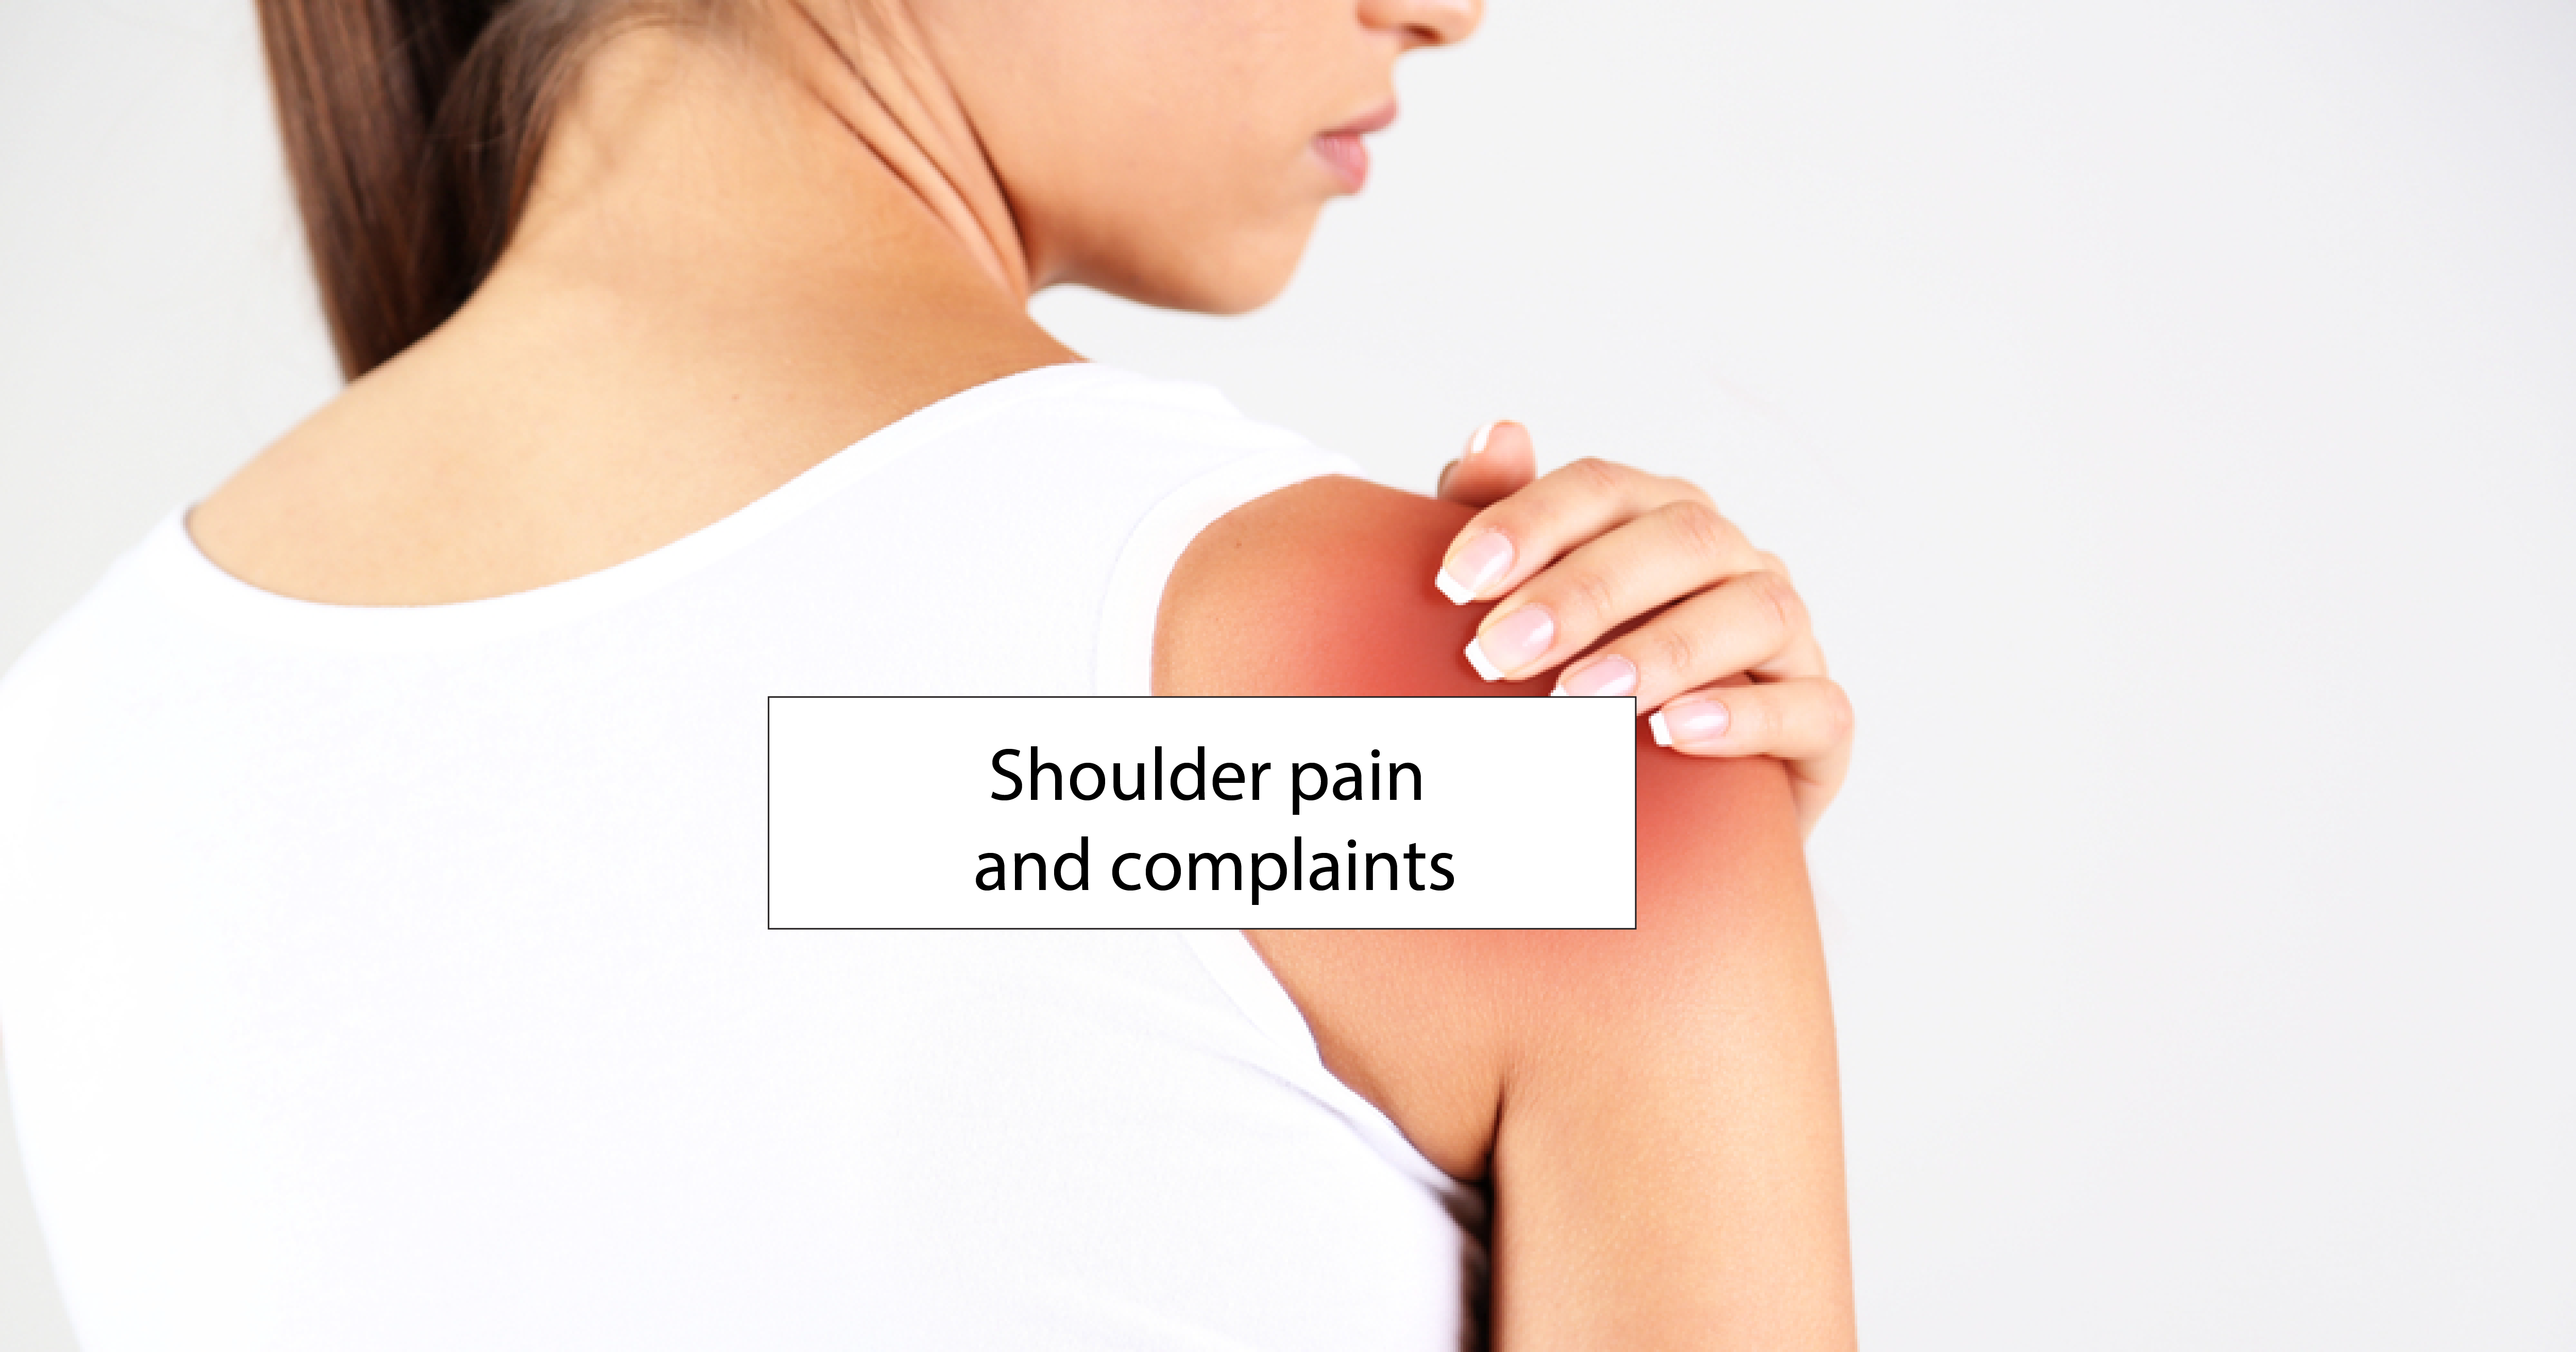 Shoulder pain and complaints: everything that can go wrong